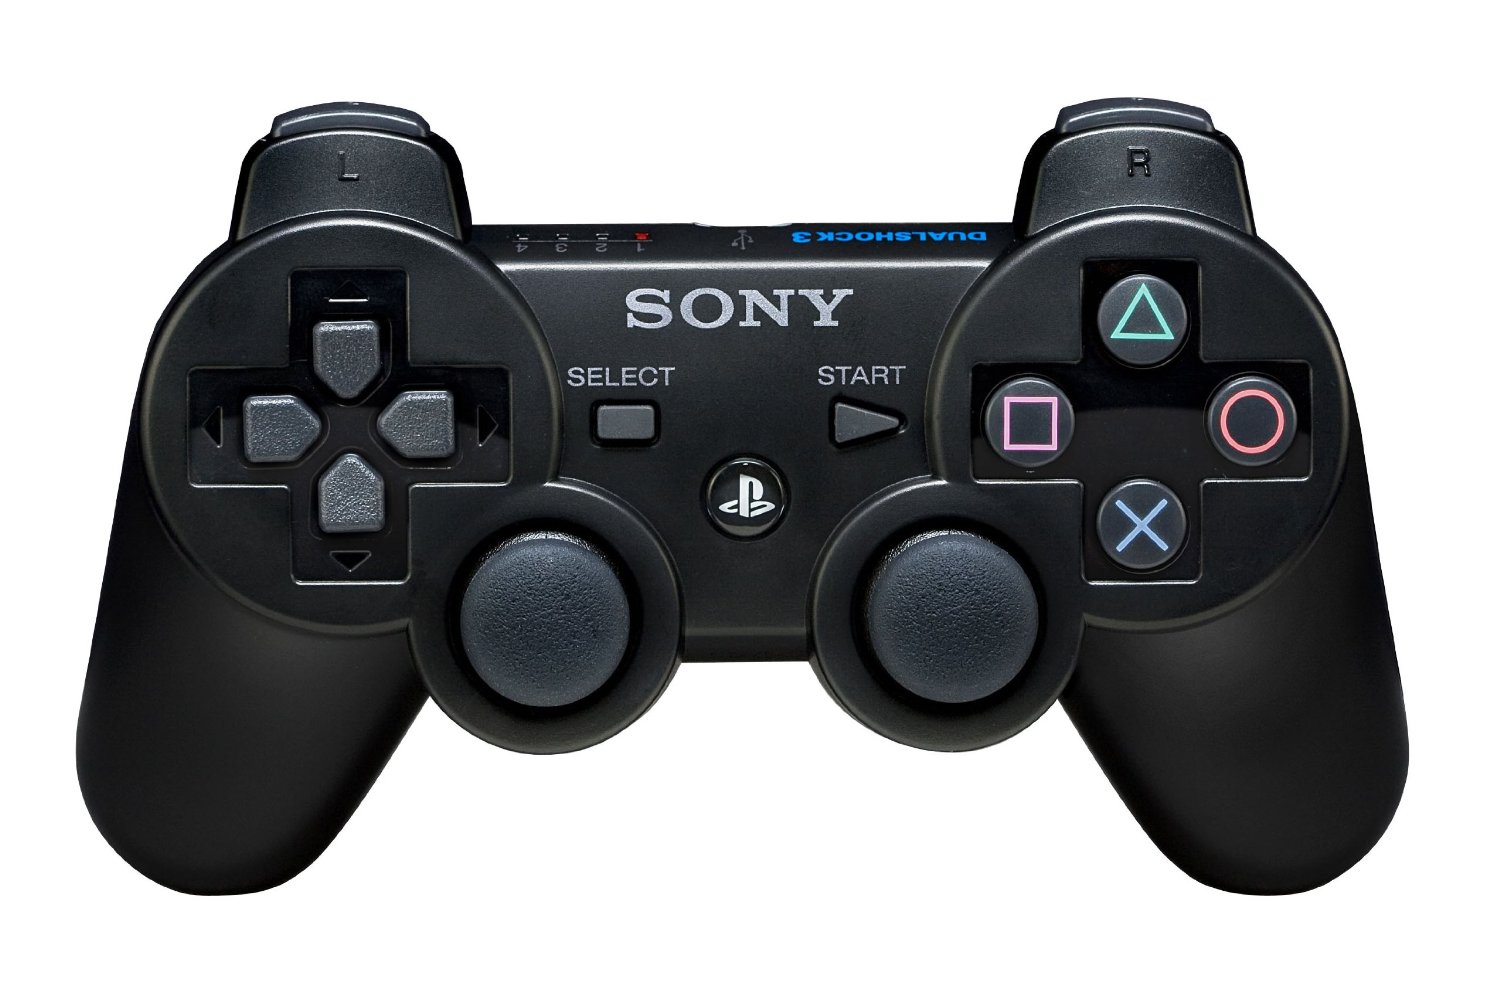 connecting dualshock 3 to pc